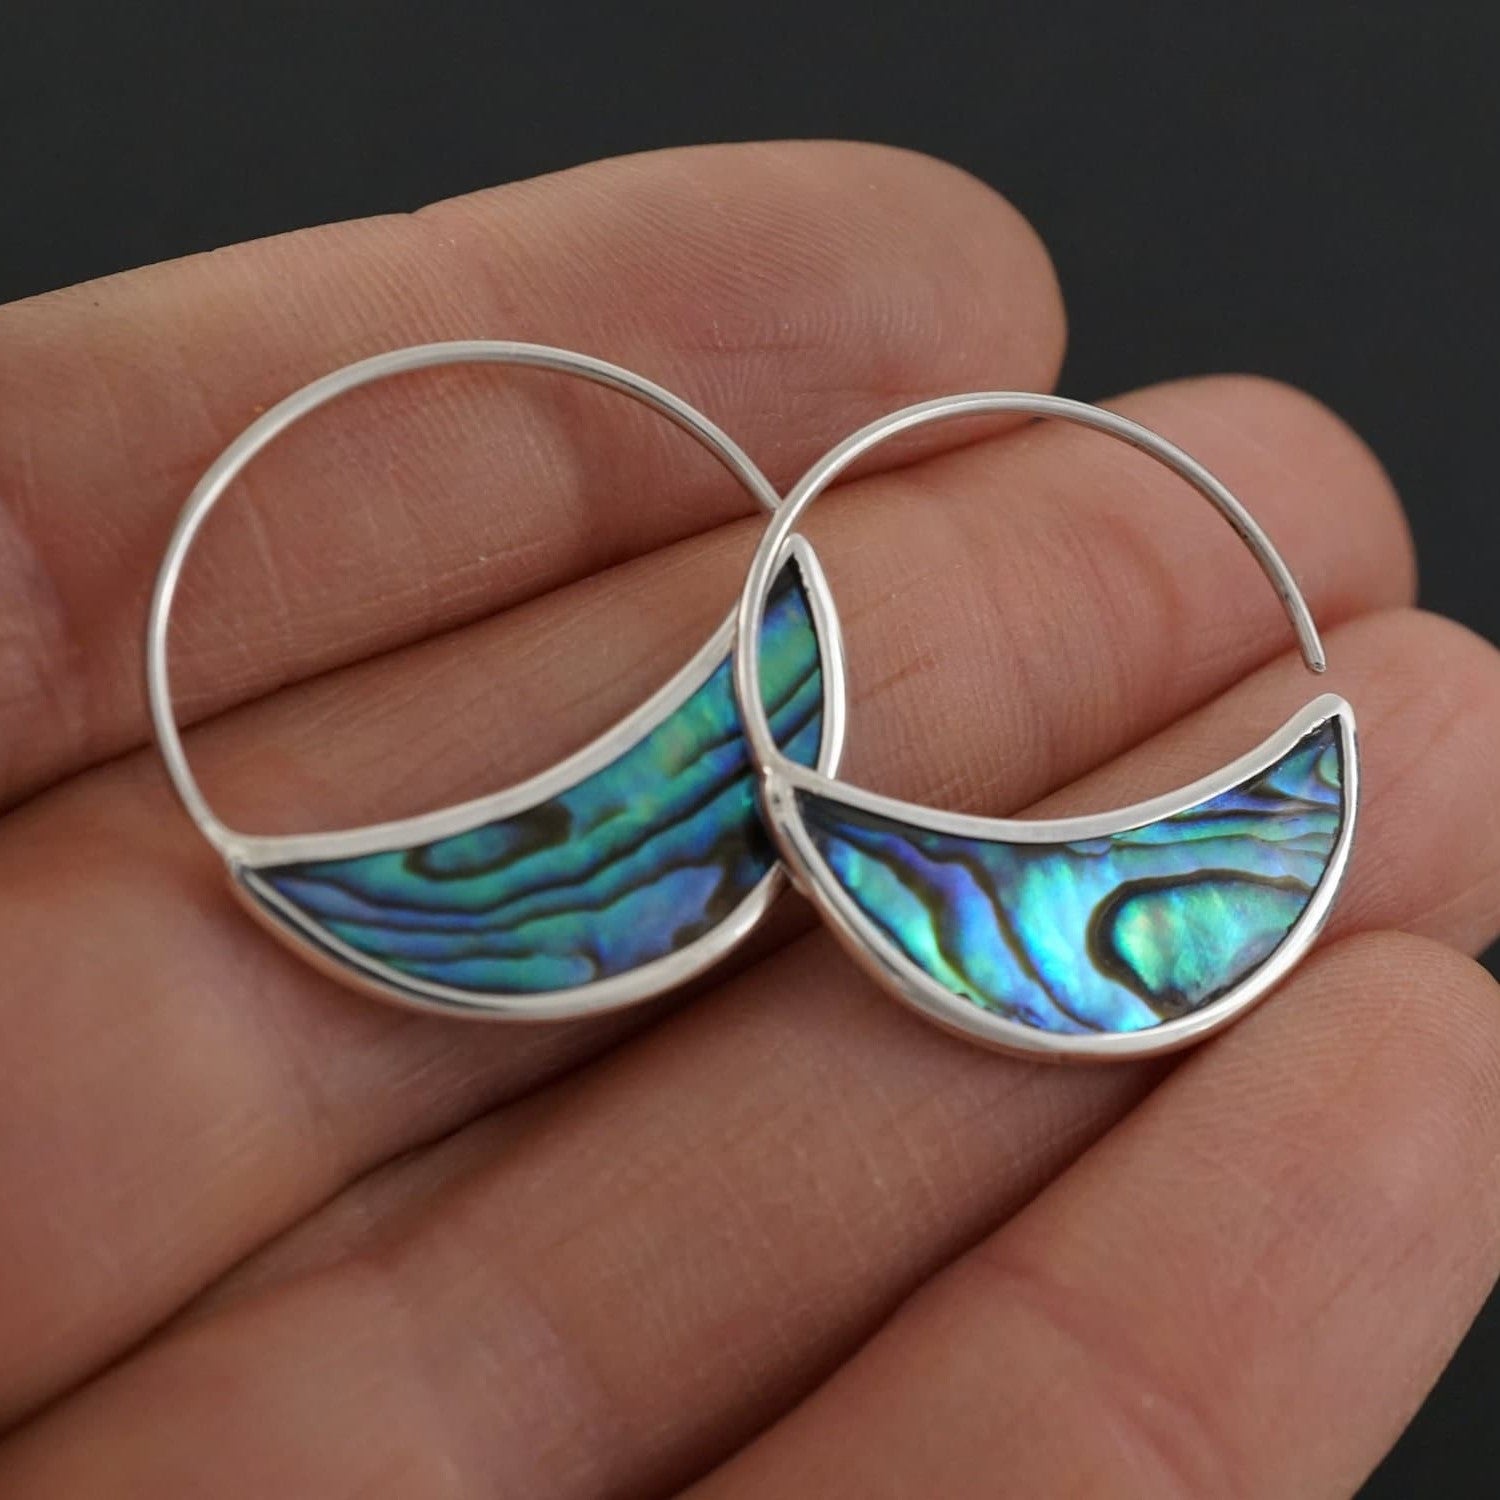 Abalone and Sterling Silver Hoop Earrings. Ocean Lover Gift for Pisces, Scorpio, Cancer (294S)